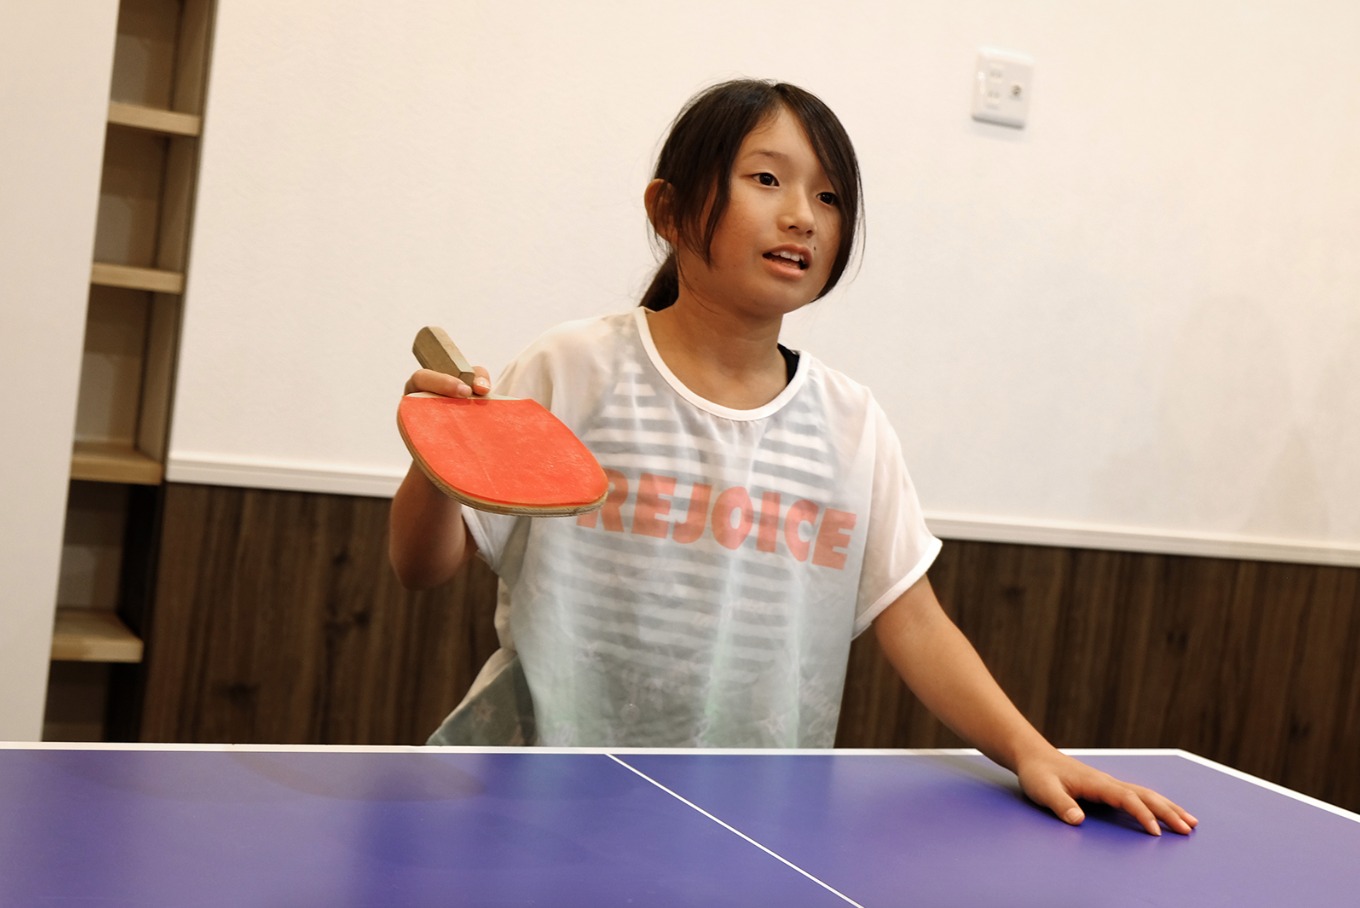 The Osakas' daughter prepares to play against her brother. Image by Emiko Jozuka. Japan, 2018.